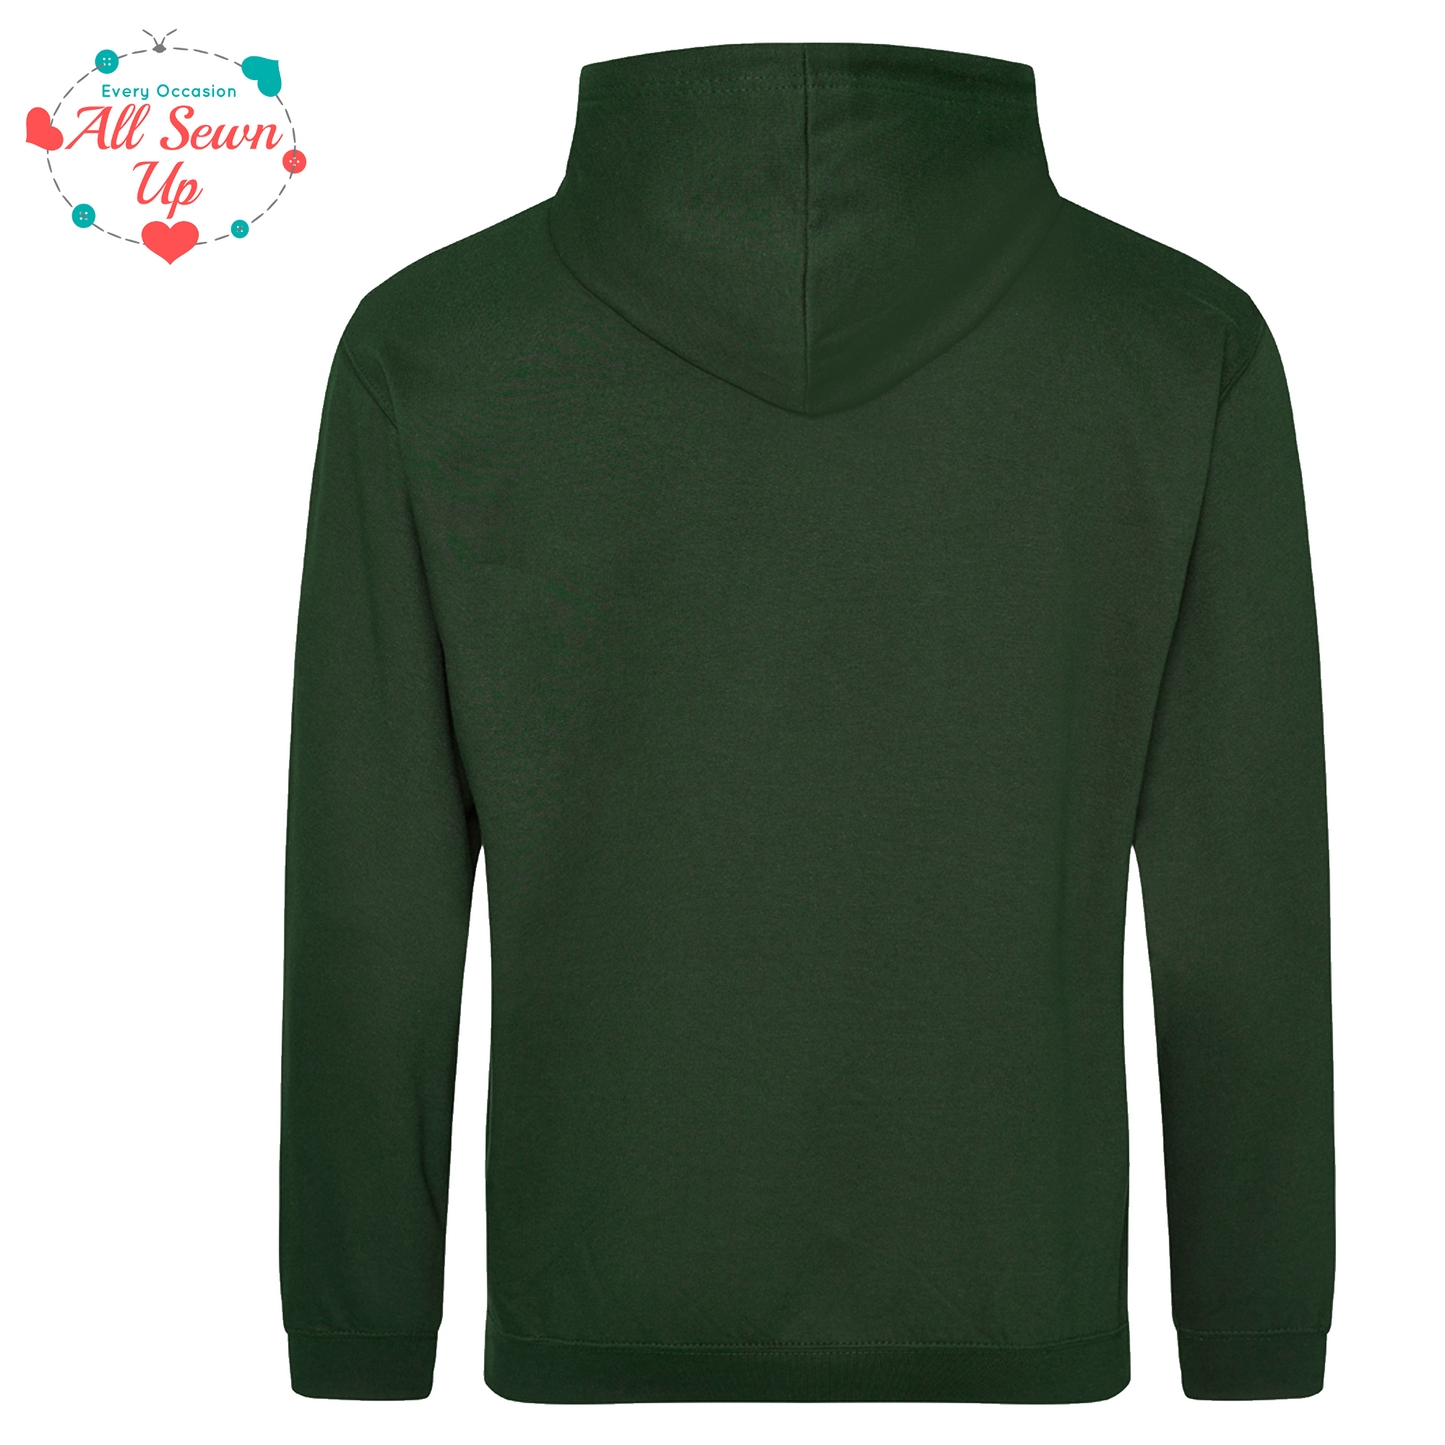 St Laurence Scouts - Bottle Green Hoodie (Child and Adult)